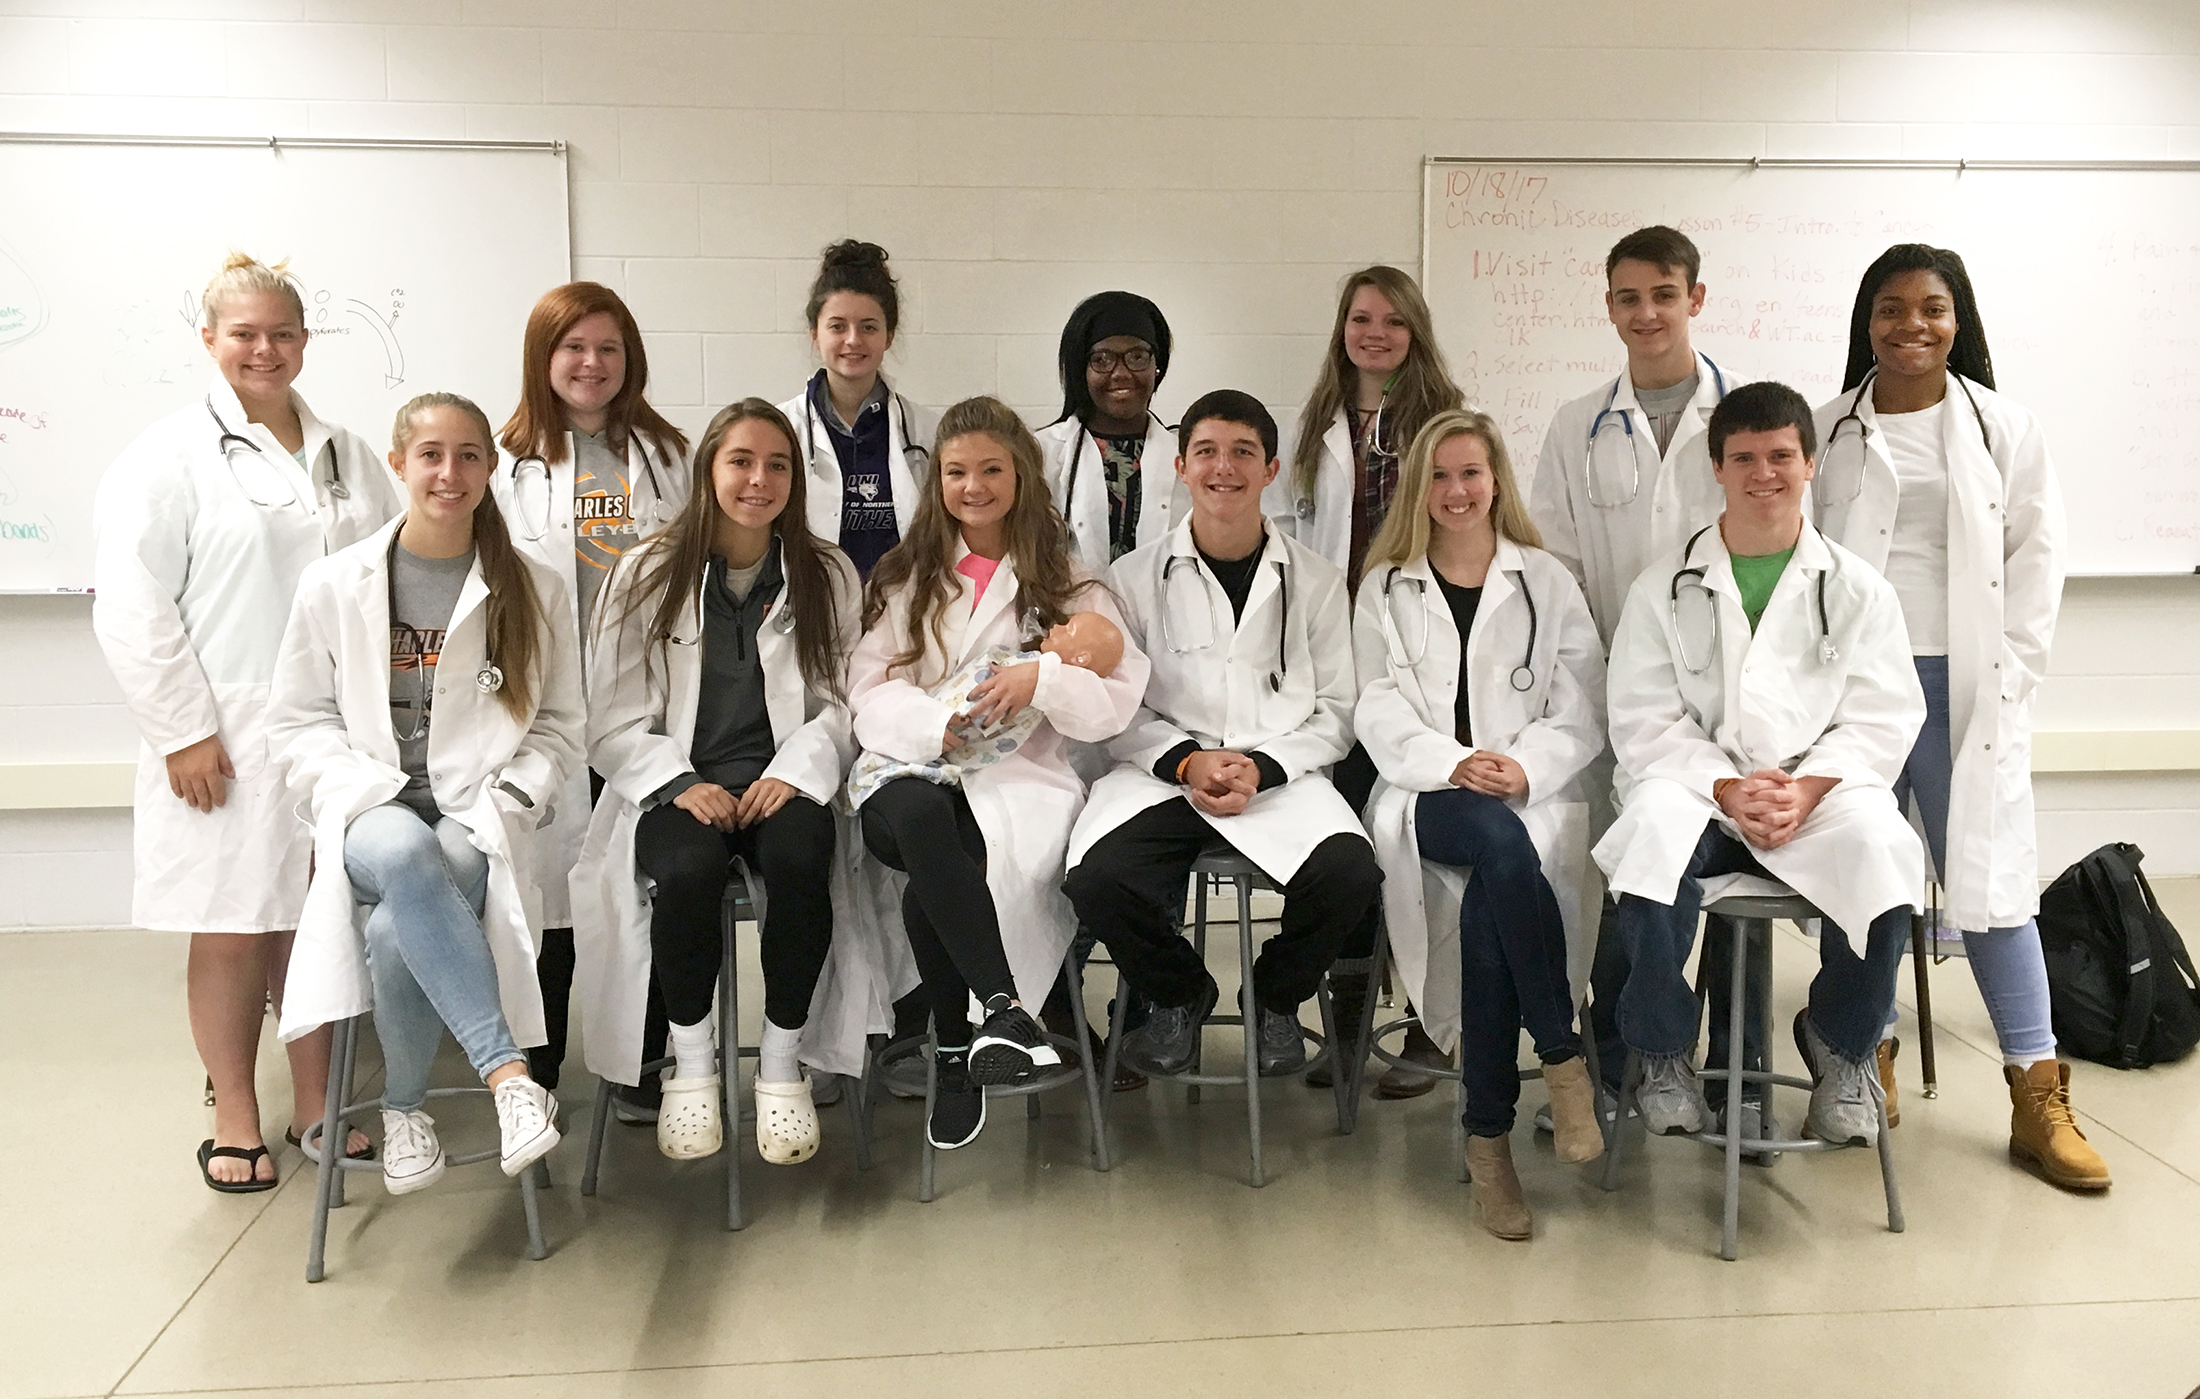 Science careers class hosts annual blood drive Oct. 31